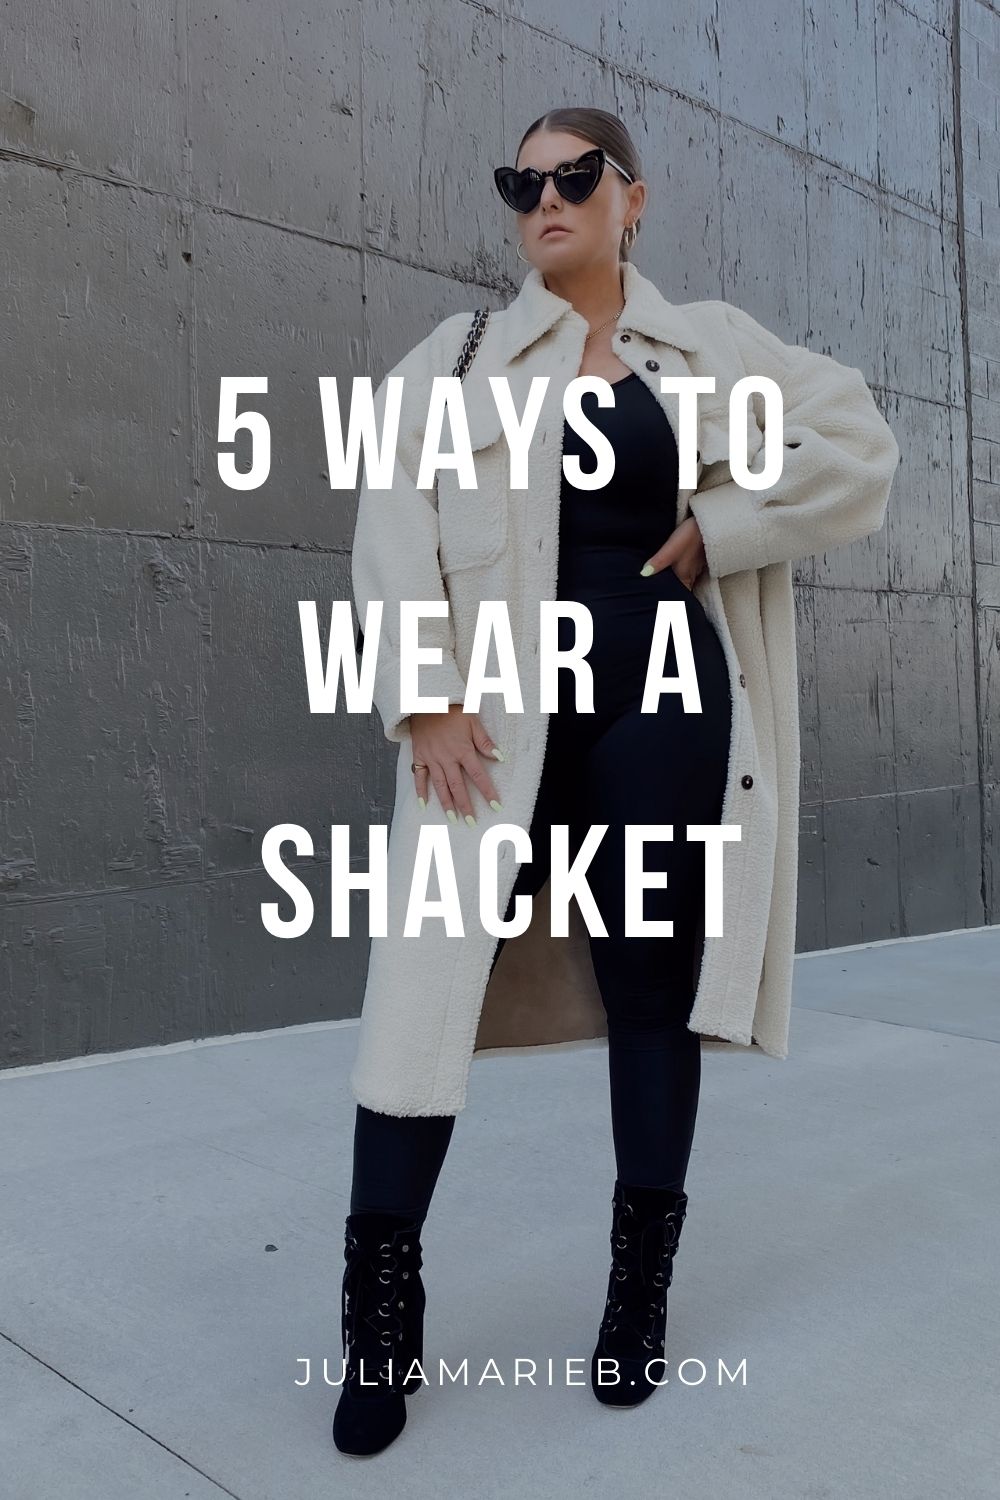 5 WAYS TO WEAR A SHACKET | THE RULE OF 5